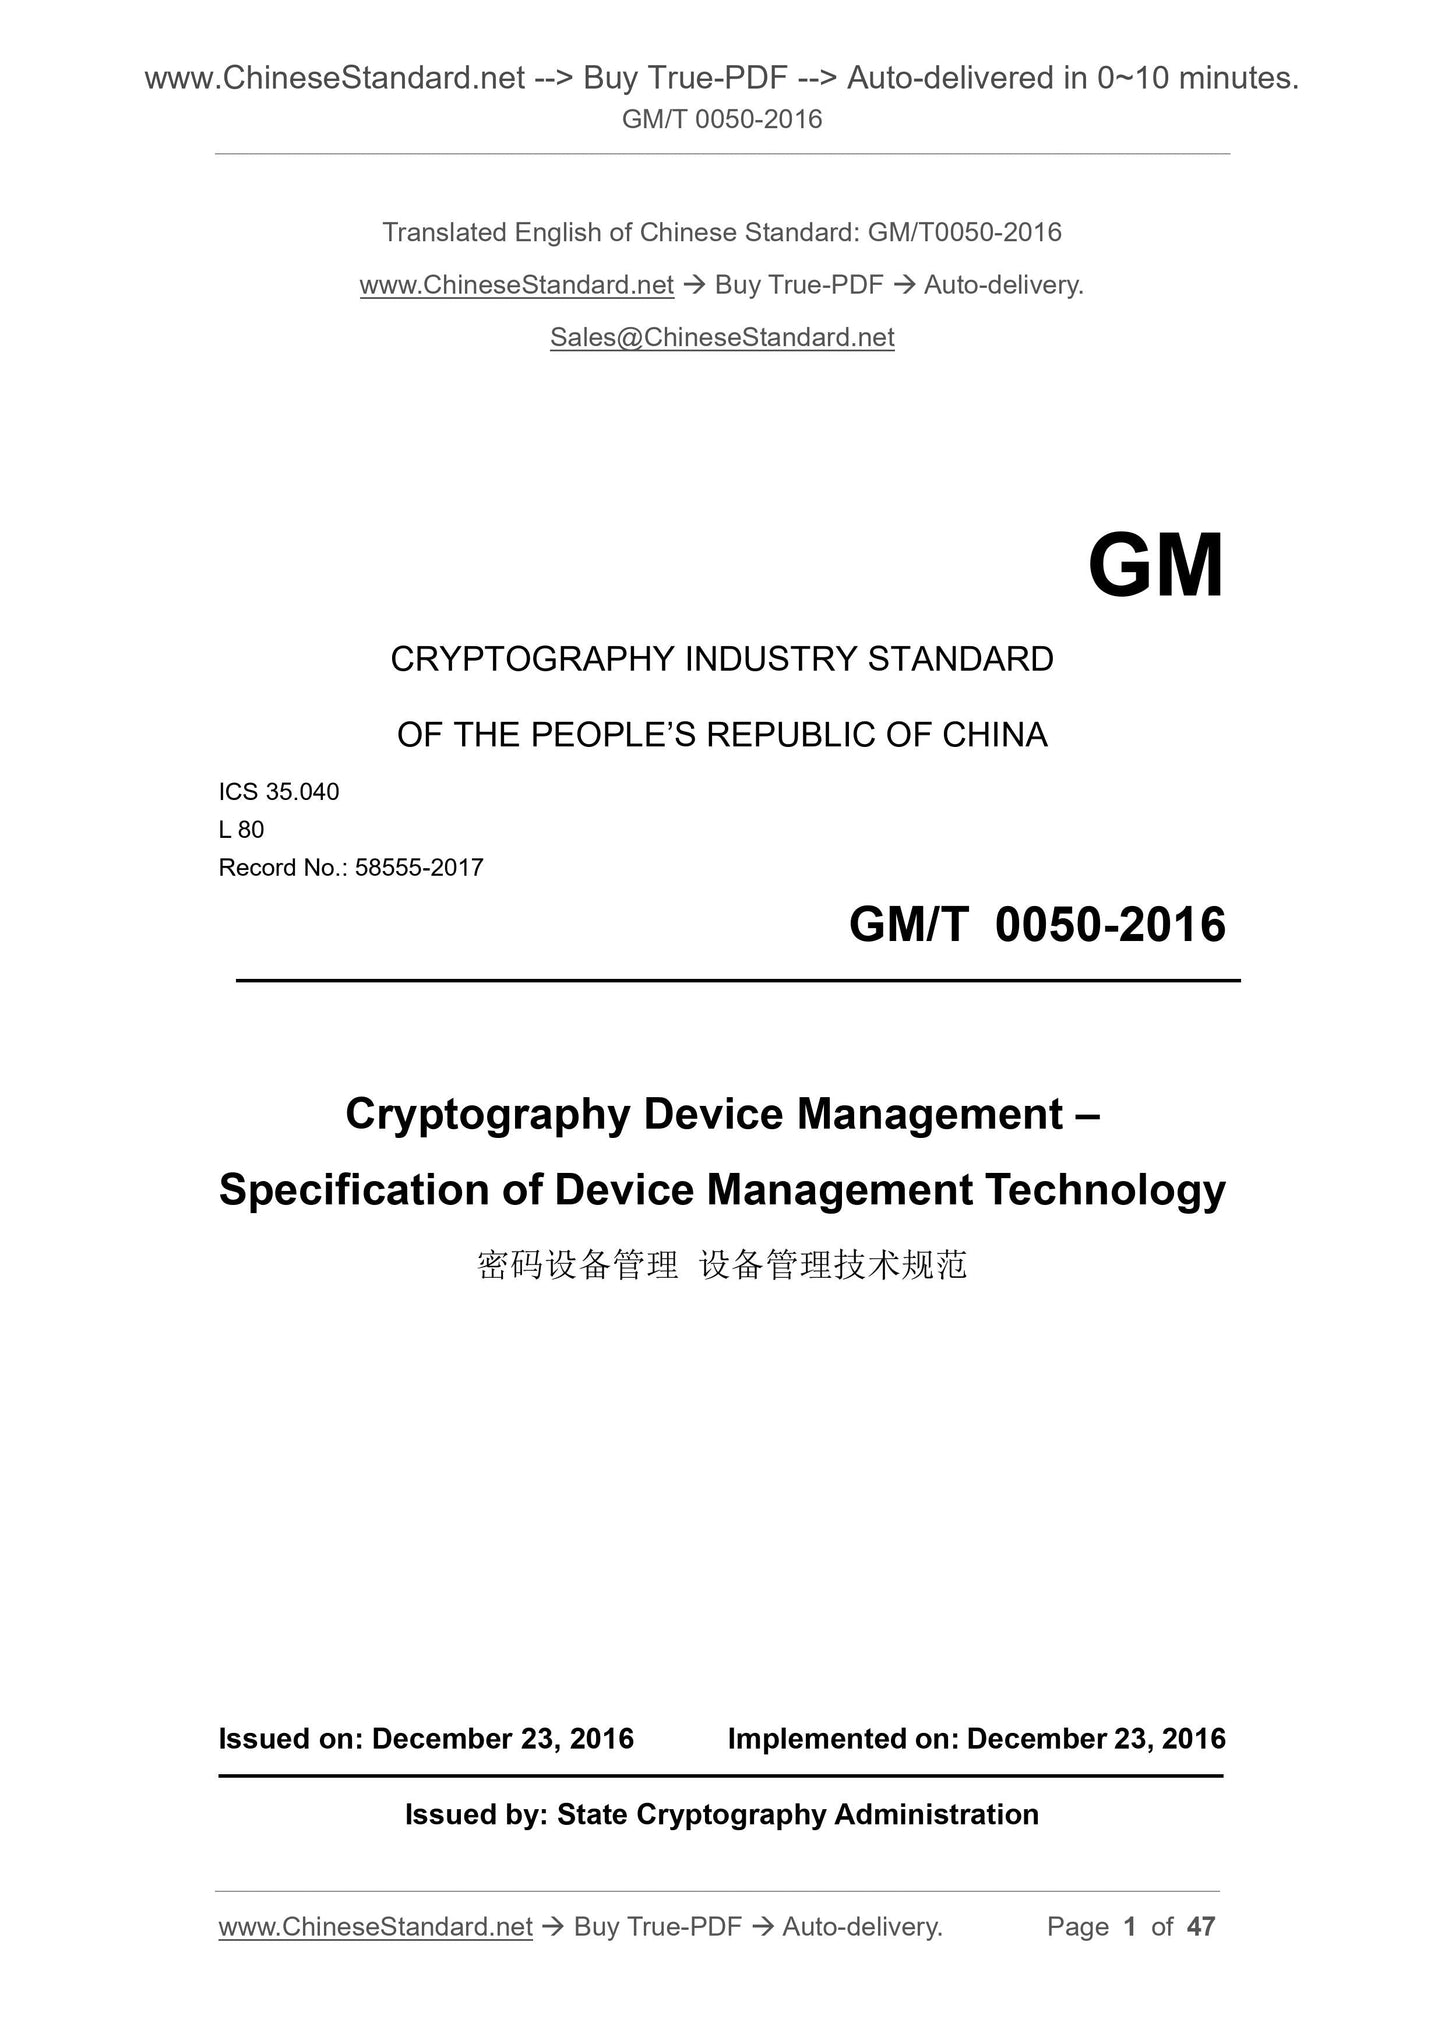 GM/T 0050-2016 Page 1